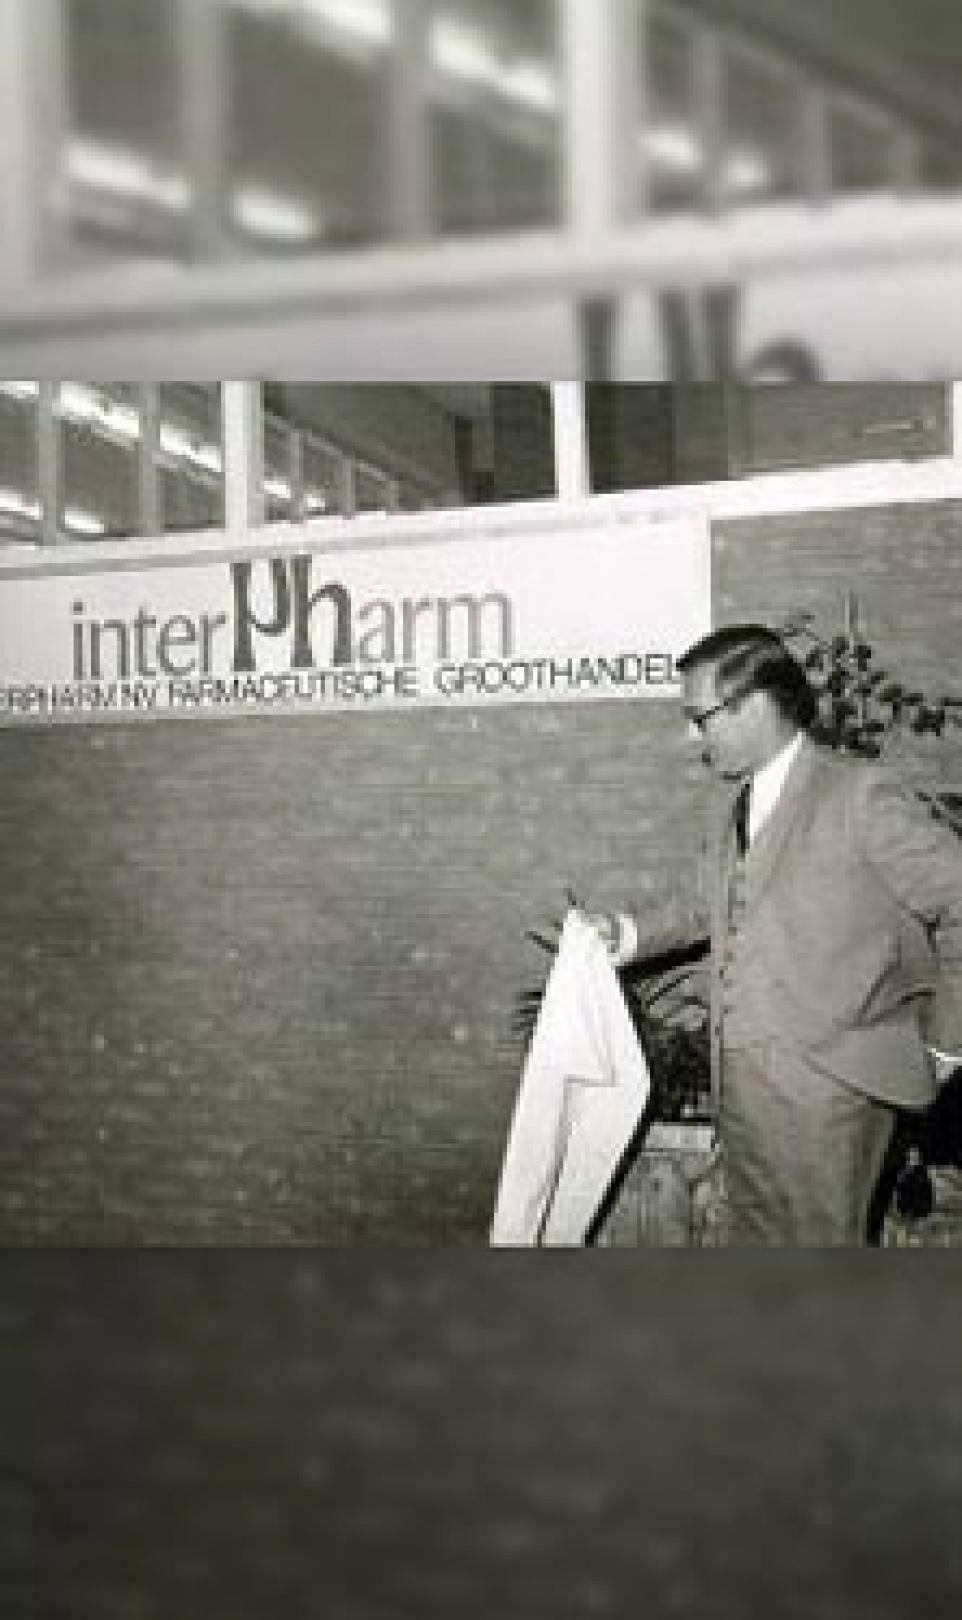 Man in a suit holding a white lab coat, pictured outside of Interpharm in The Netherlands